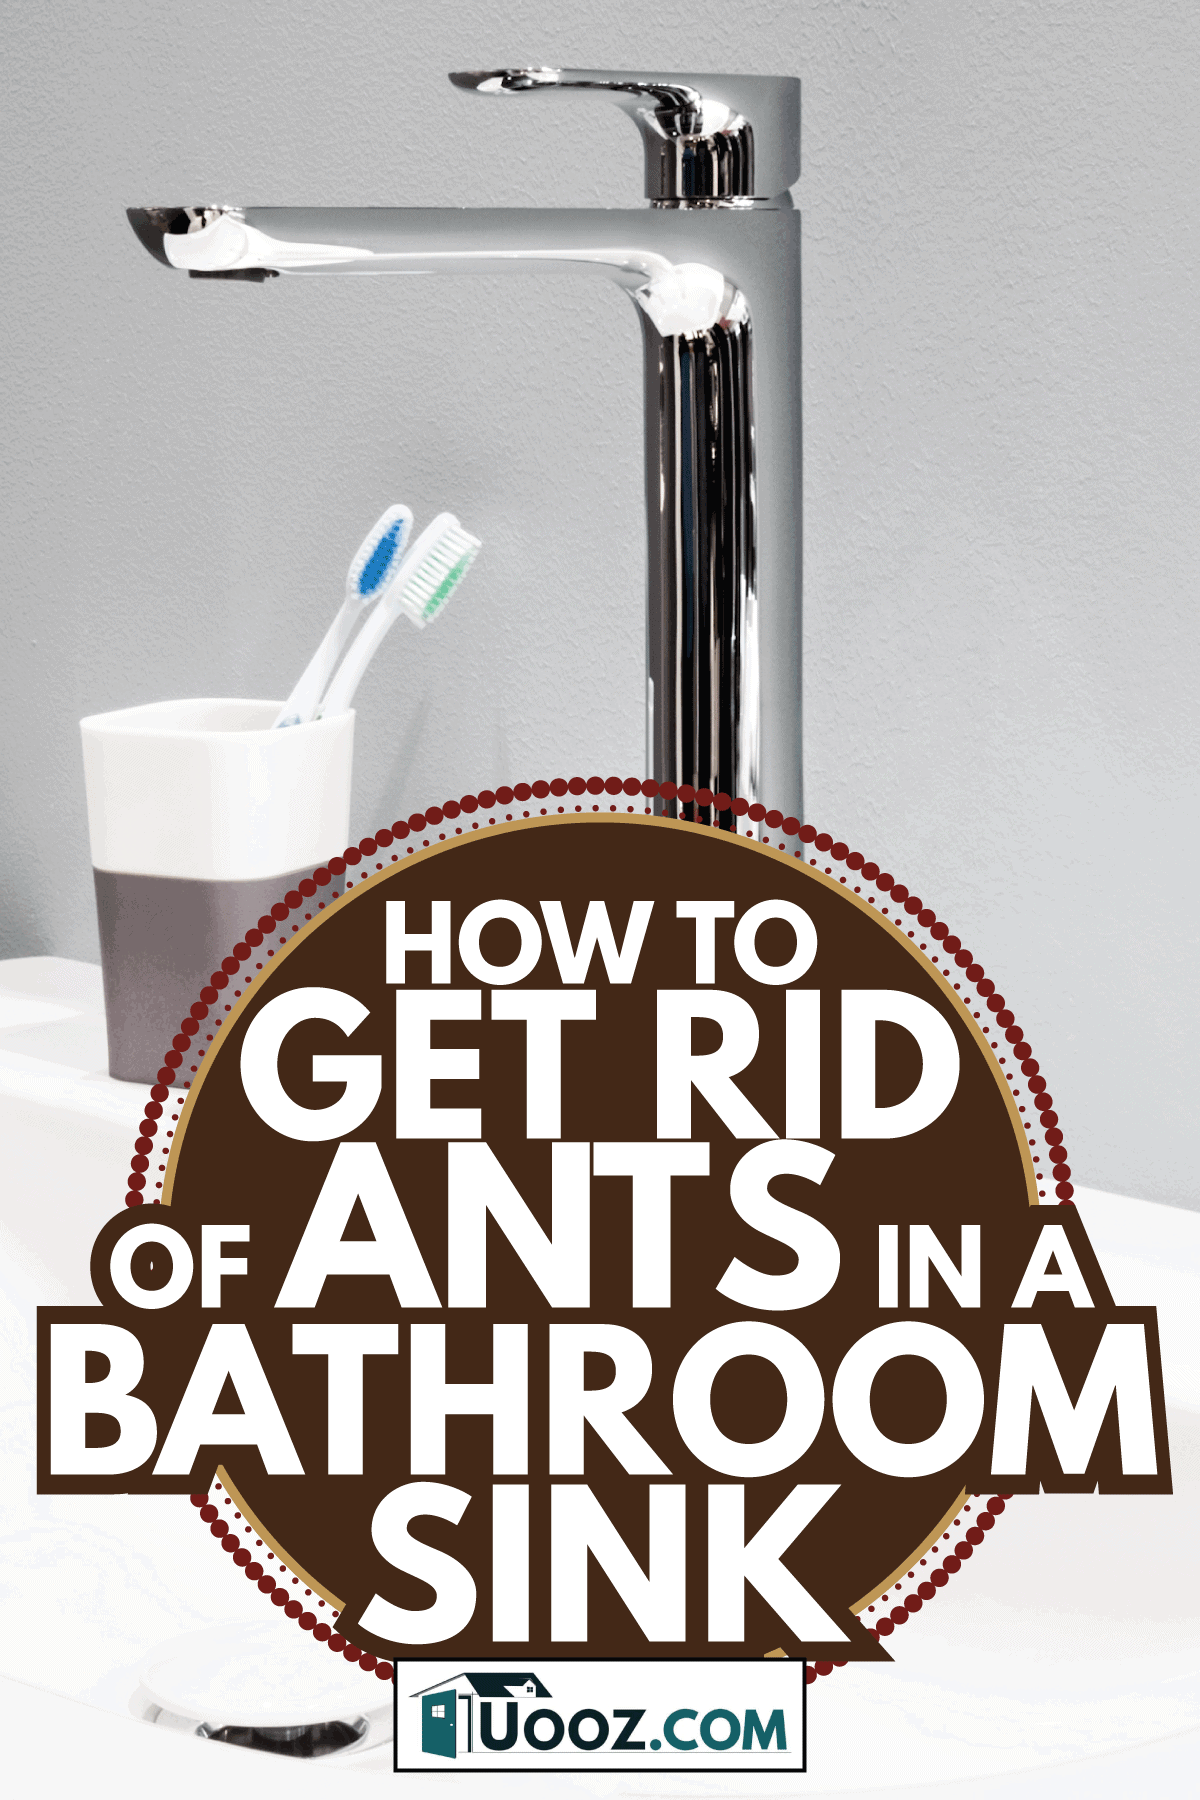 How To Get Rid Of Ants In A Bathroom Sink Uooz Com - Ants In Bathroom Sink Overflow Drainage